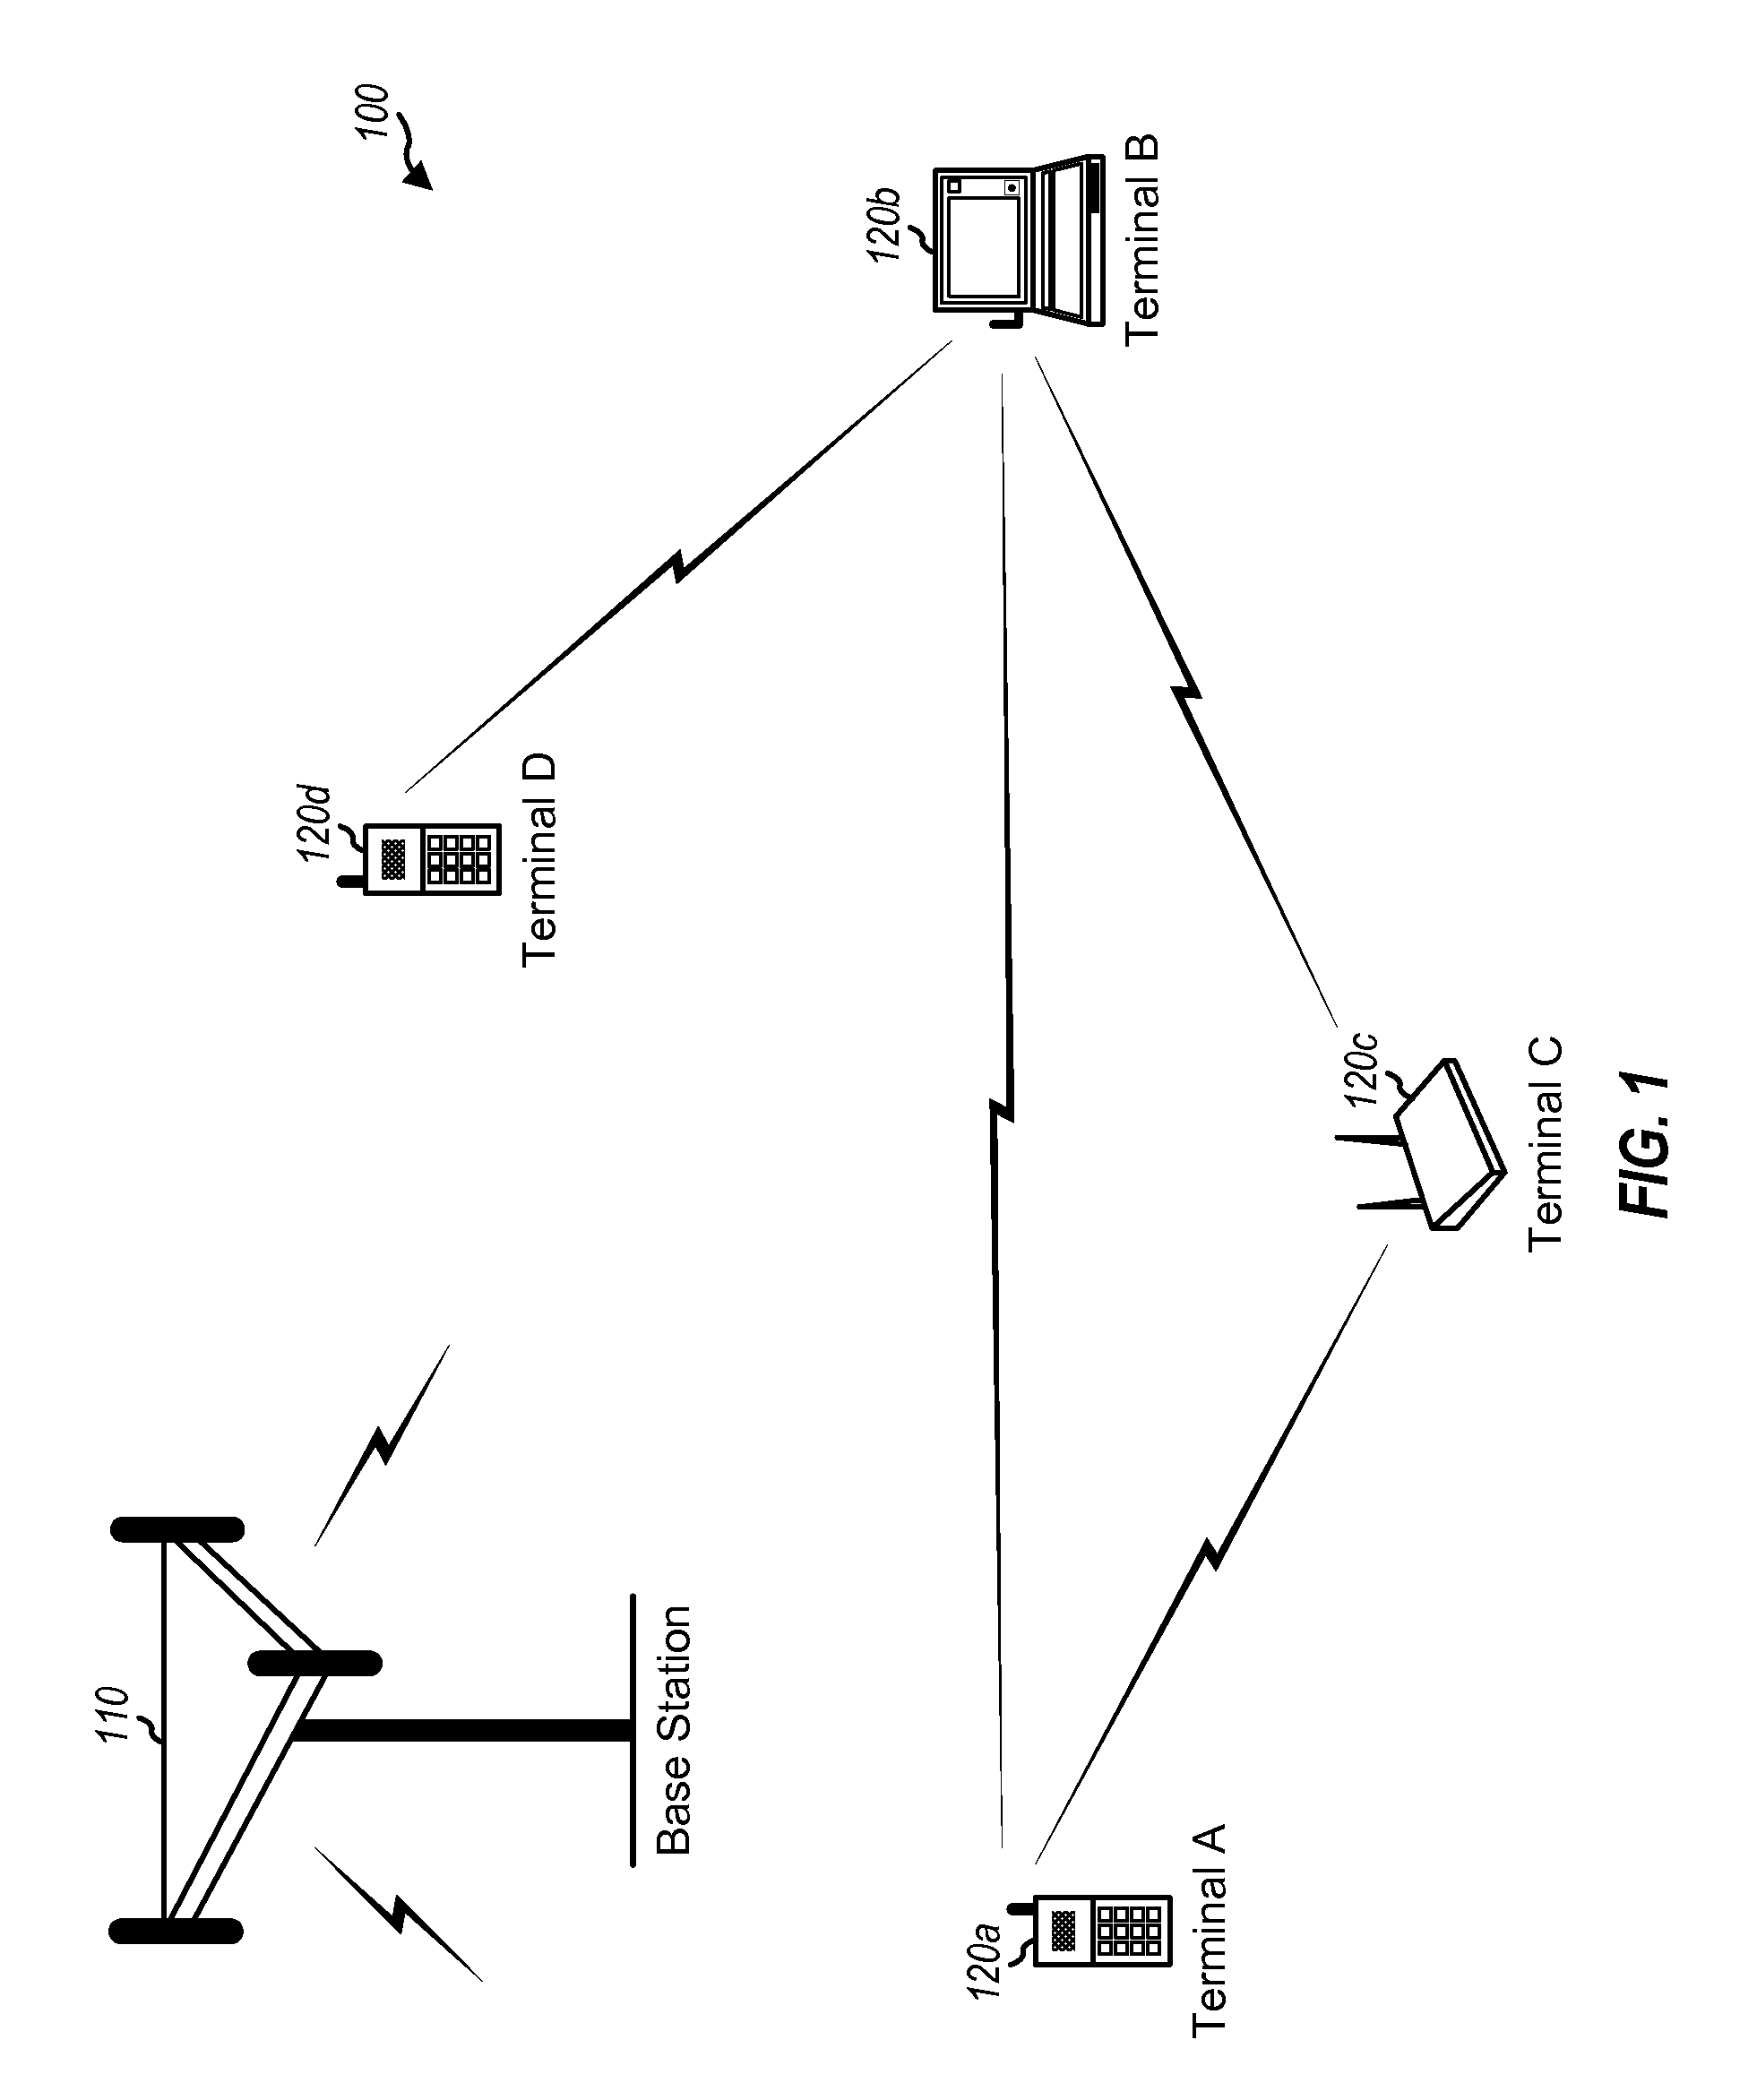 Transmission with collision detection and mitigation for wireless communication